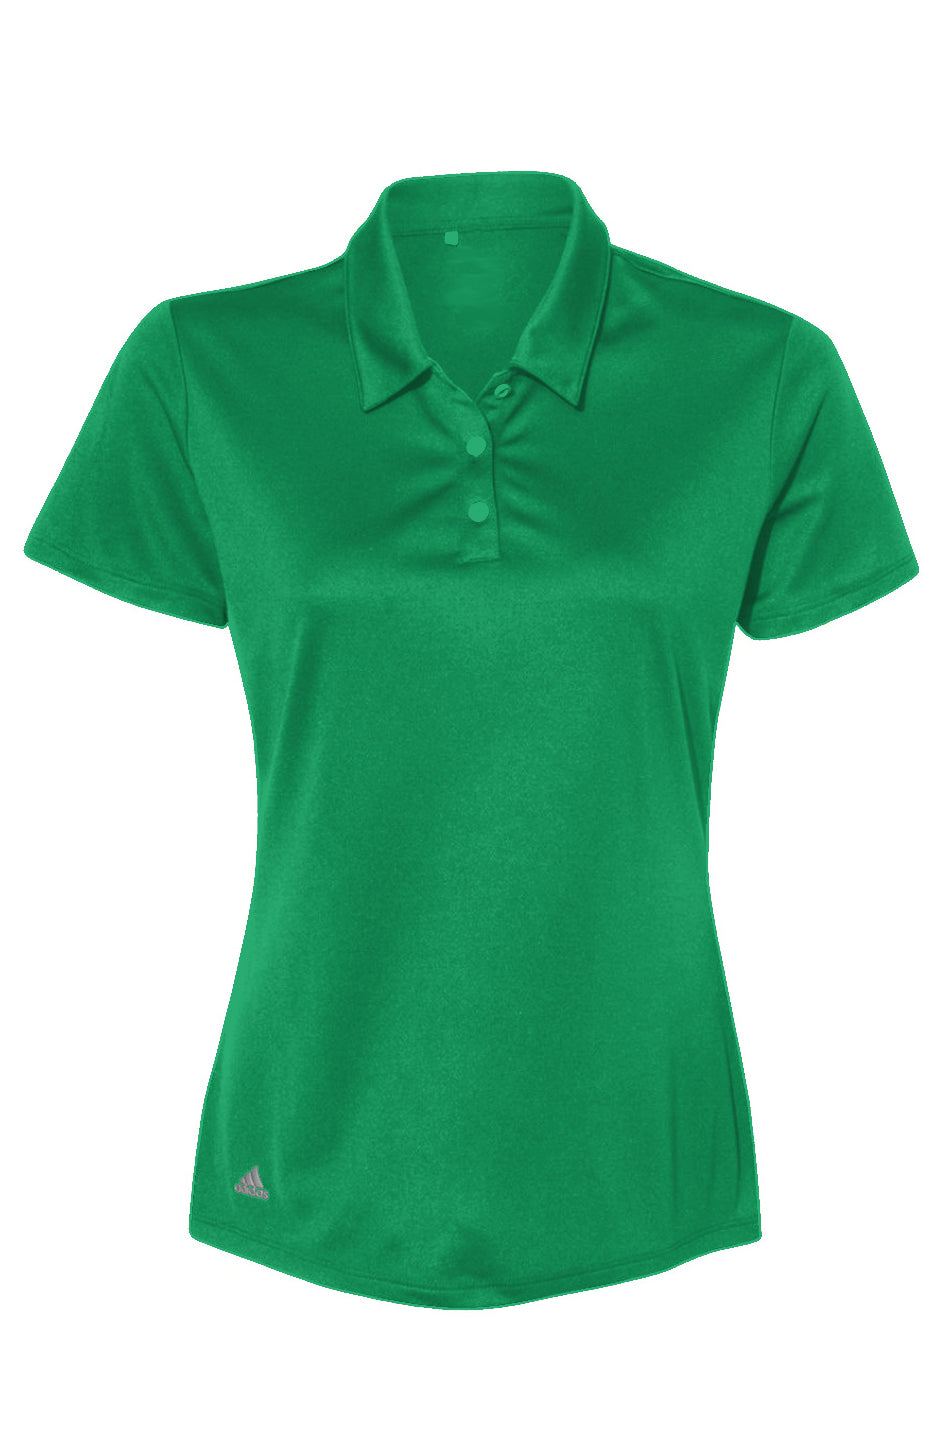 "ANDREA" Adidas Women Performance Polo - OnlyFit